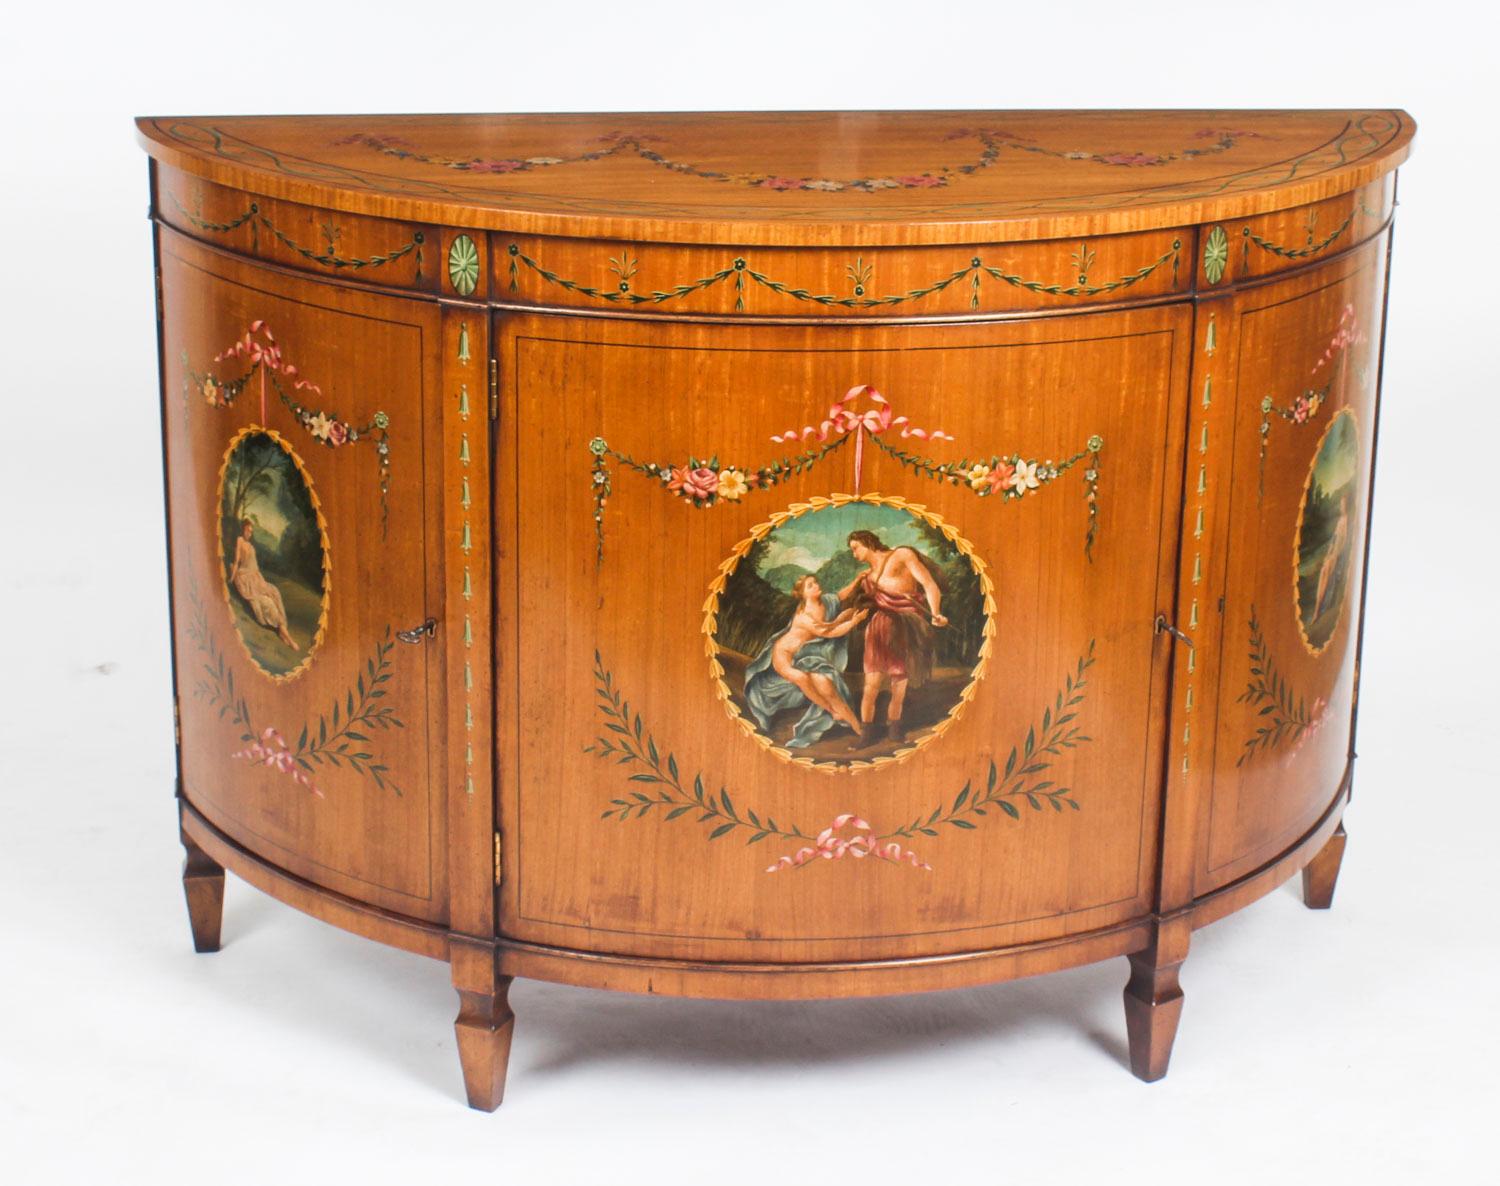 This is a gorgeous pair of antique Adam Revival satinwood demi lune commodes with beautiful hand painted decoration, daing from the late 19th century.

Each commode has striking hand painted decoration of classical scenes, floral garlands and